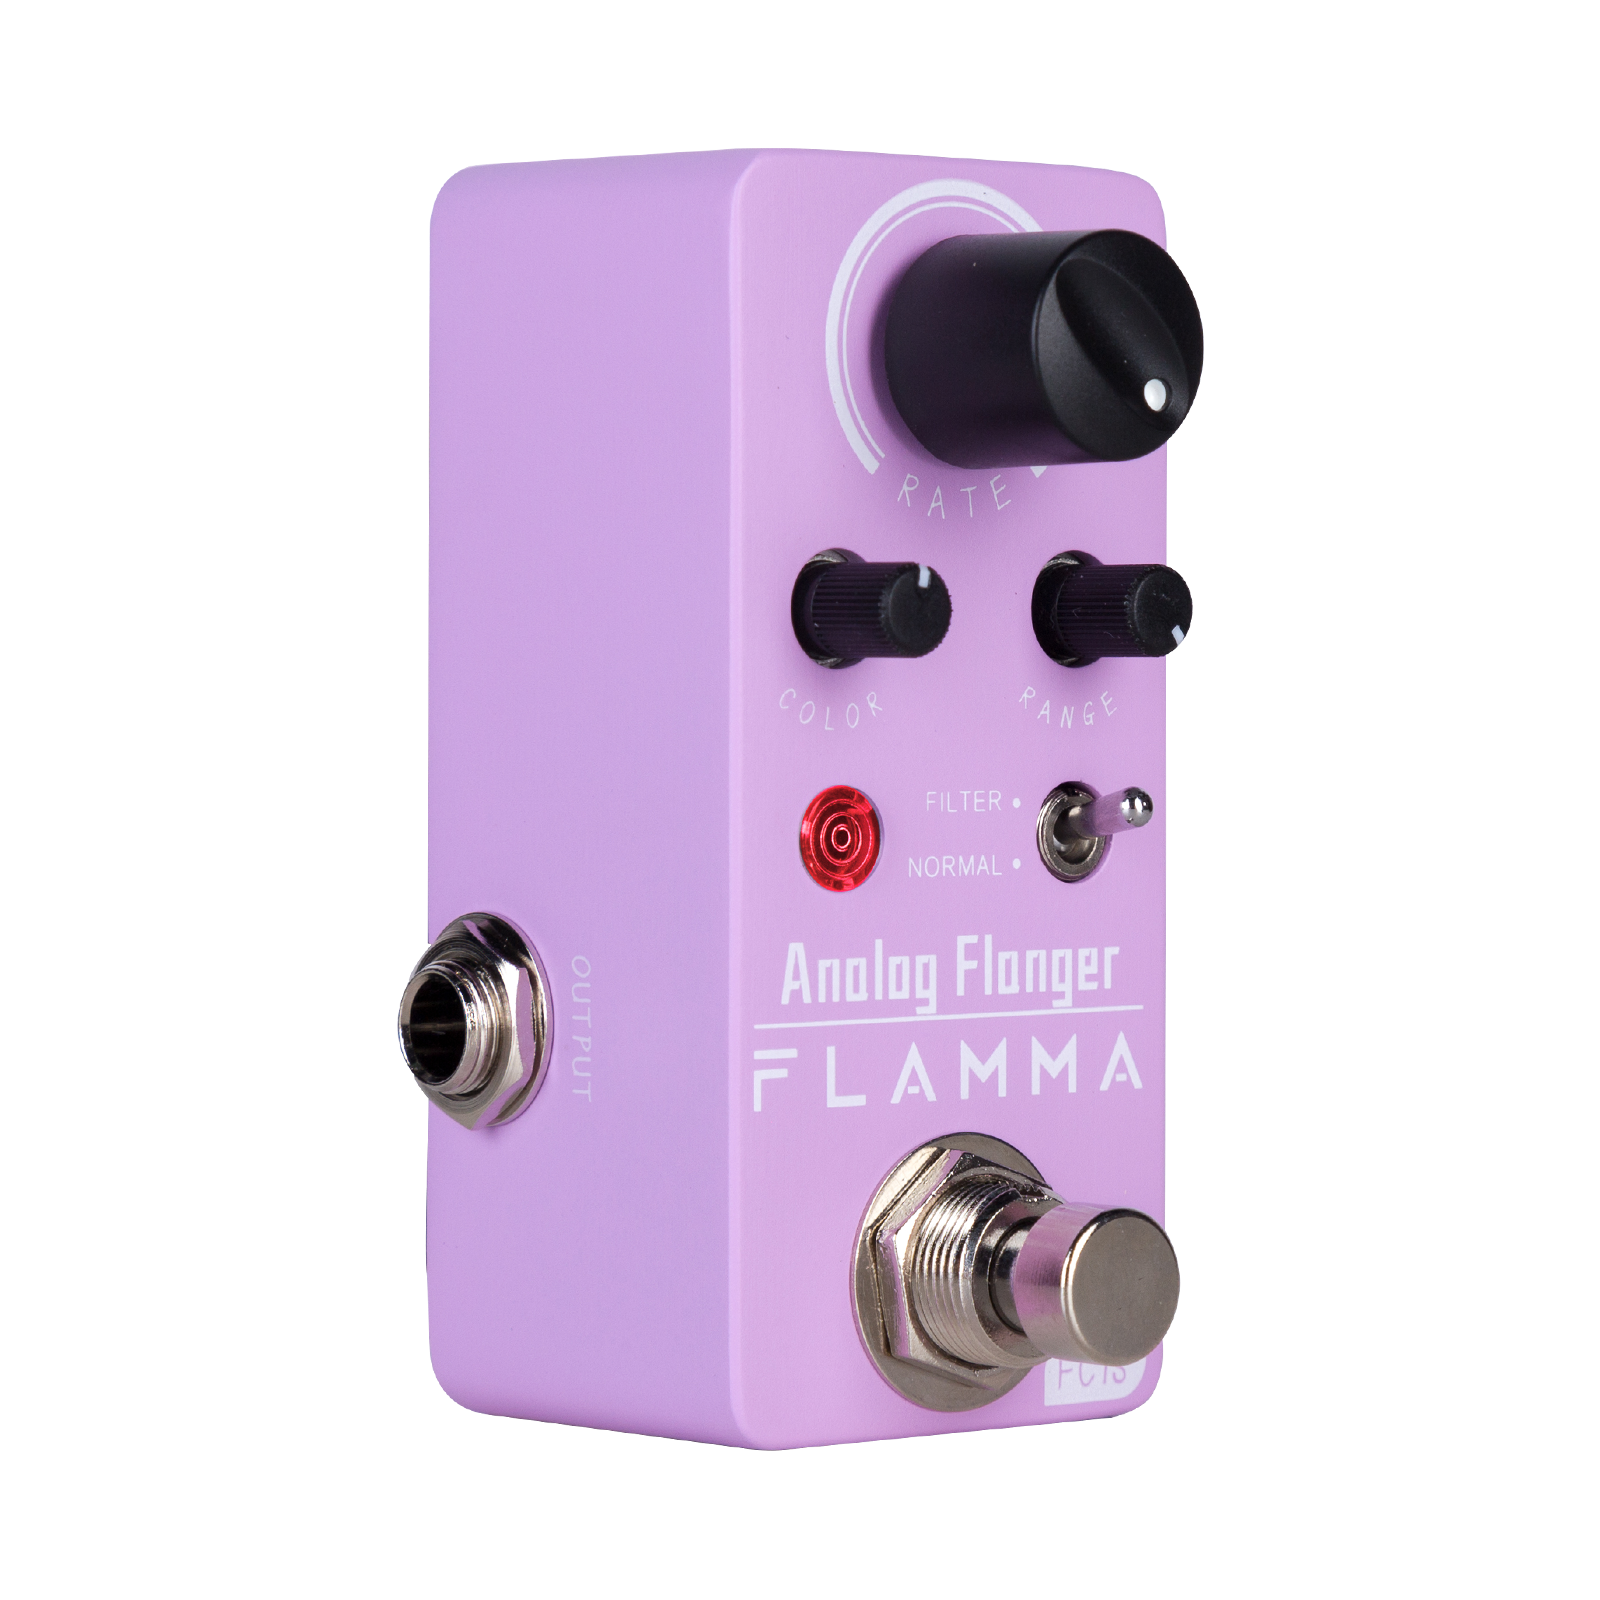 FLAMMA FC15 Classic Analog Flanger with Filter and Oscillator